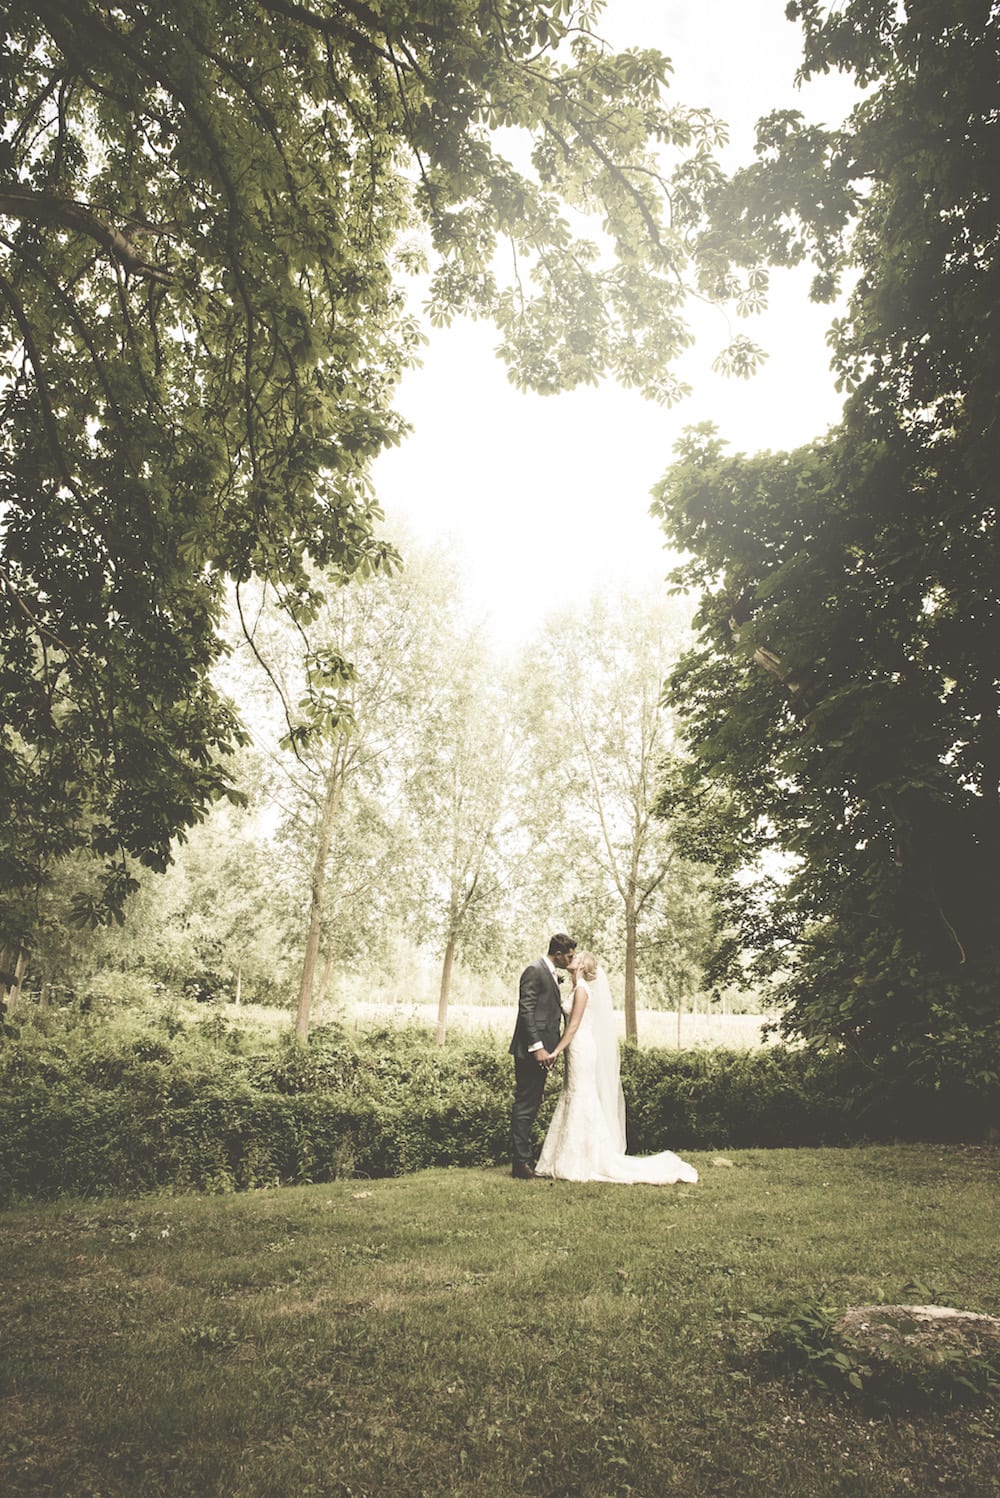 Beautiful outdoor wedding photos at Notley Abbey Oxfordshire